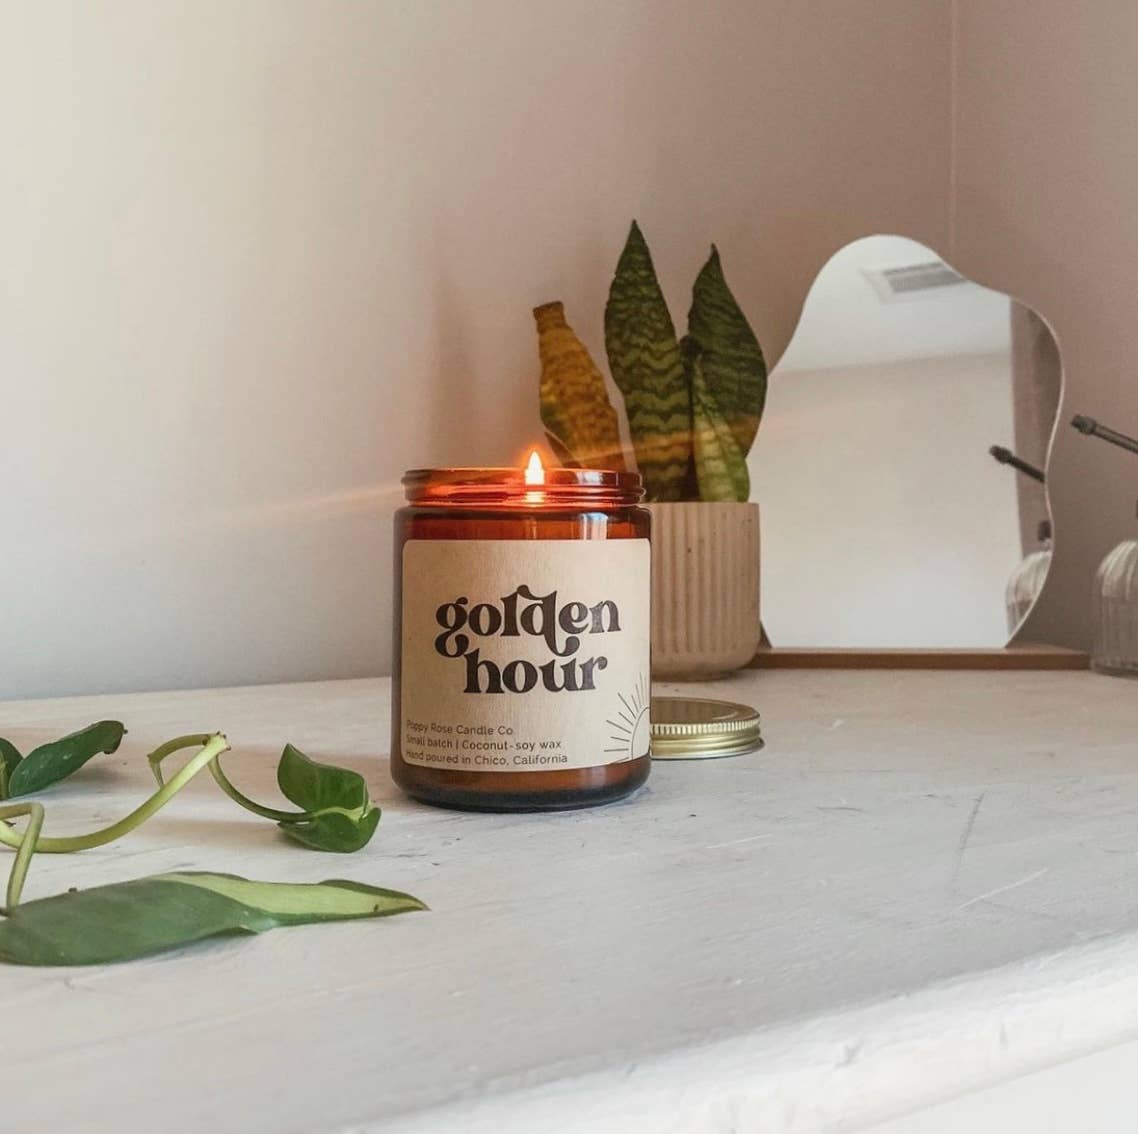 Golden Hour 8 oz coconut wax candle